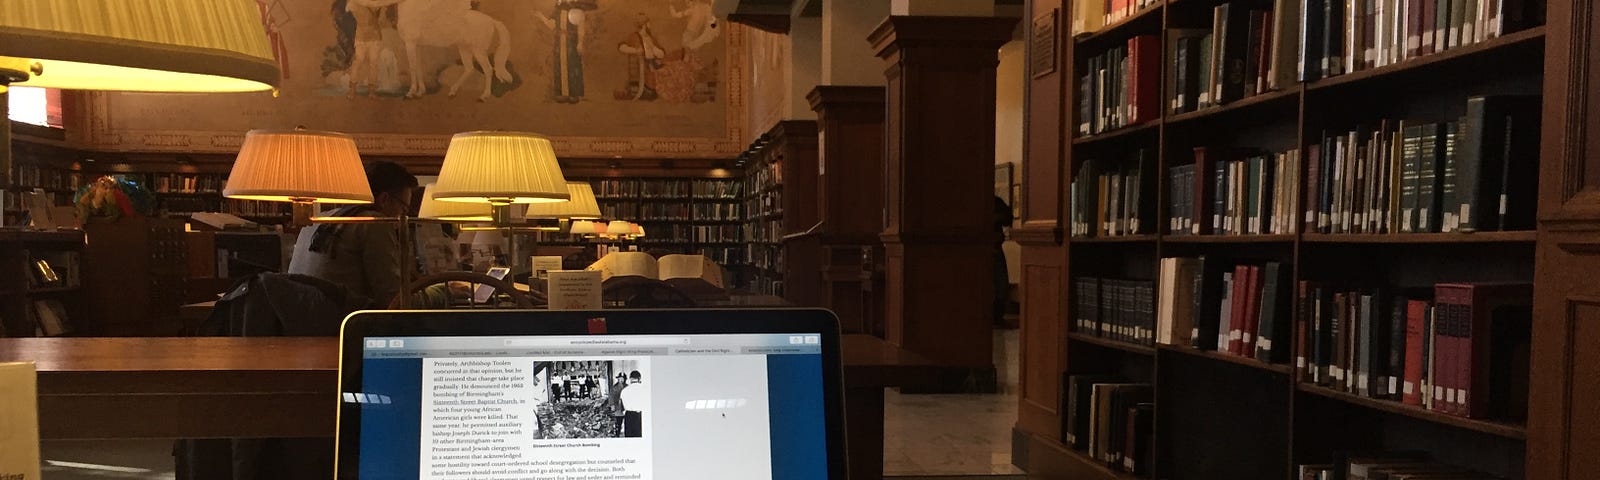 Laptop and notebook on a table in a library reading room